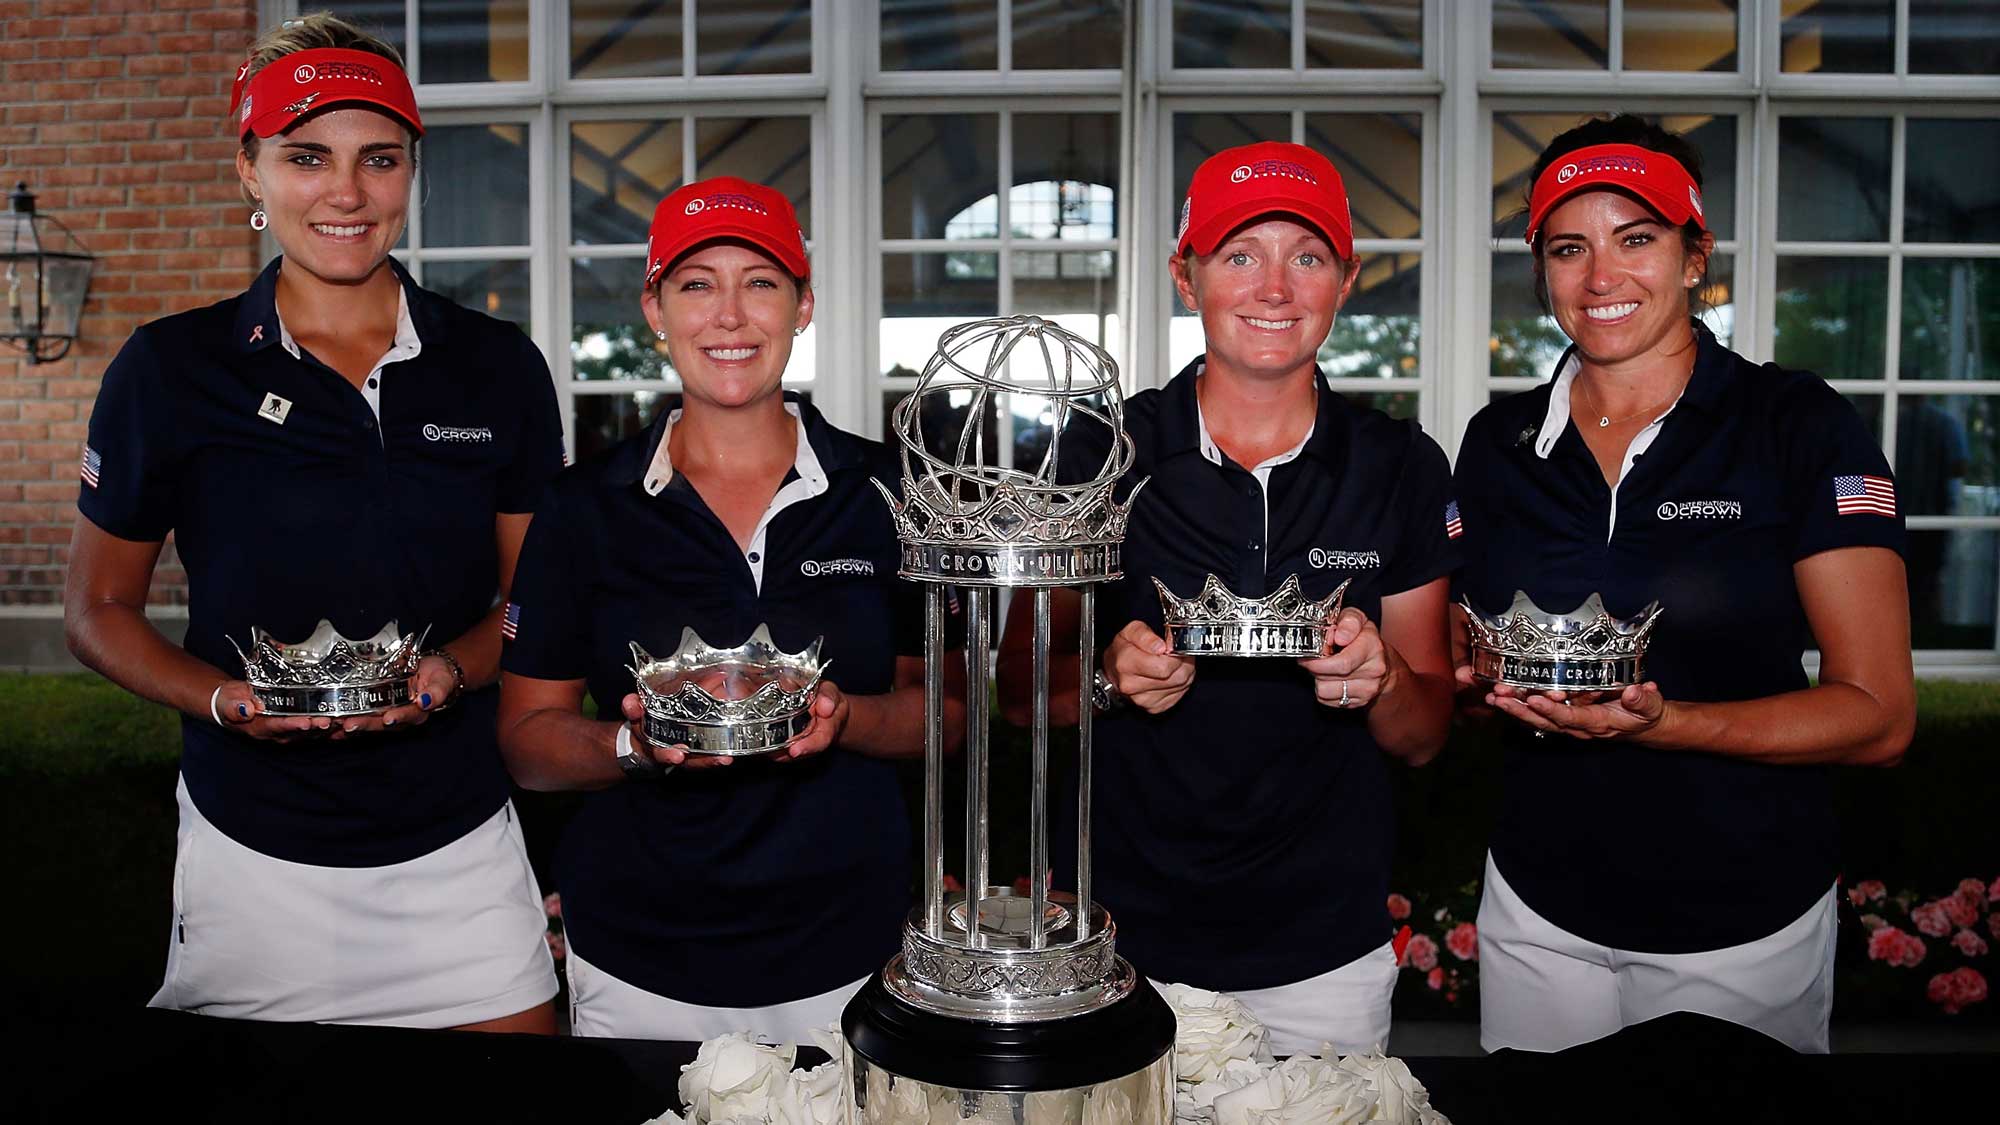 L-R) Lexi Thompson, Cristie Kerr, Stacy Lewis and Gerina Piller of the United States pose with the champions trophy after winning the 2016 UL International Crown